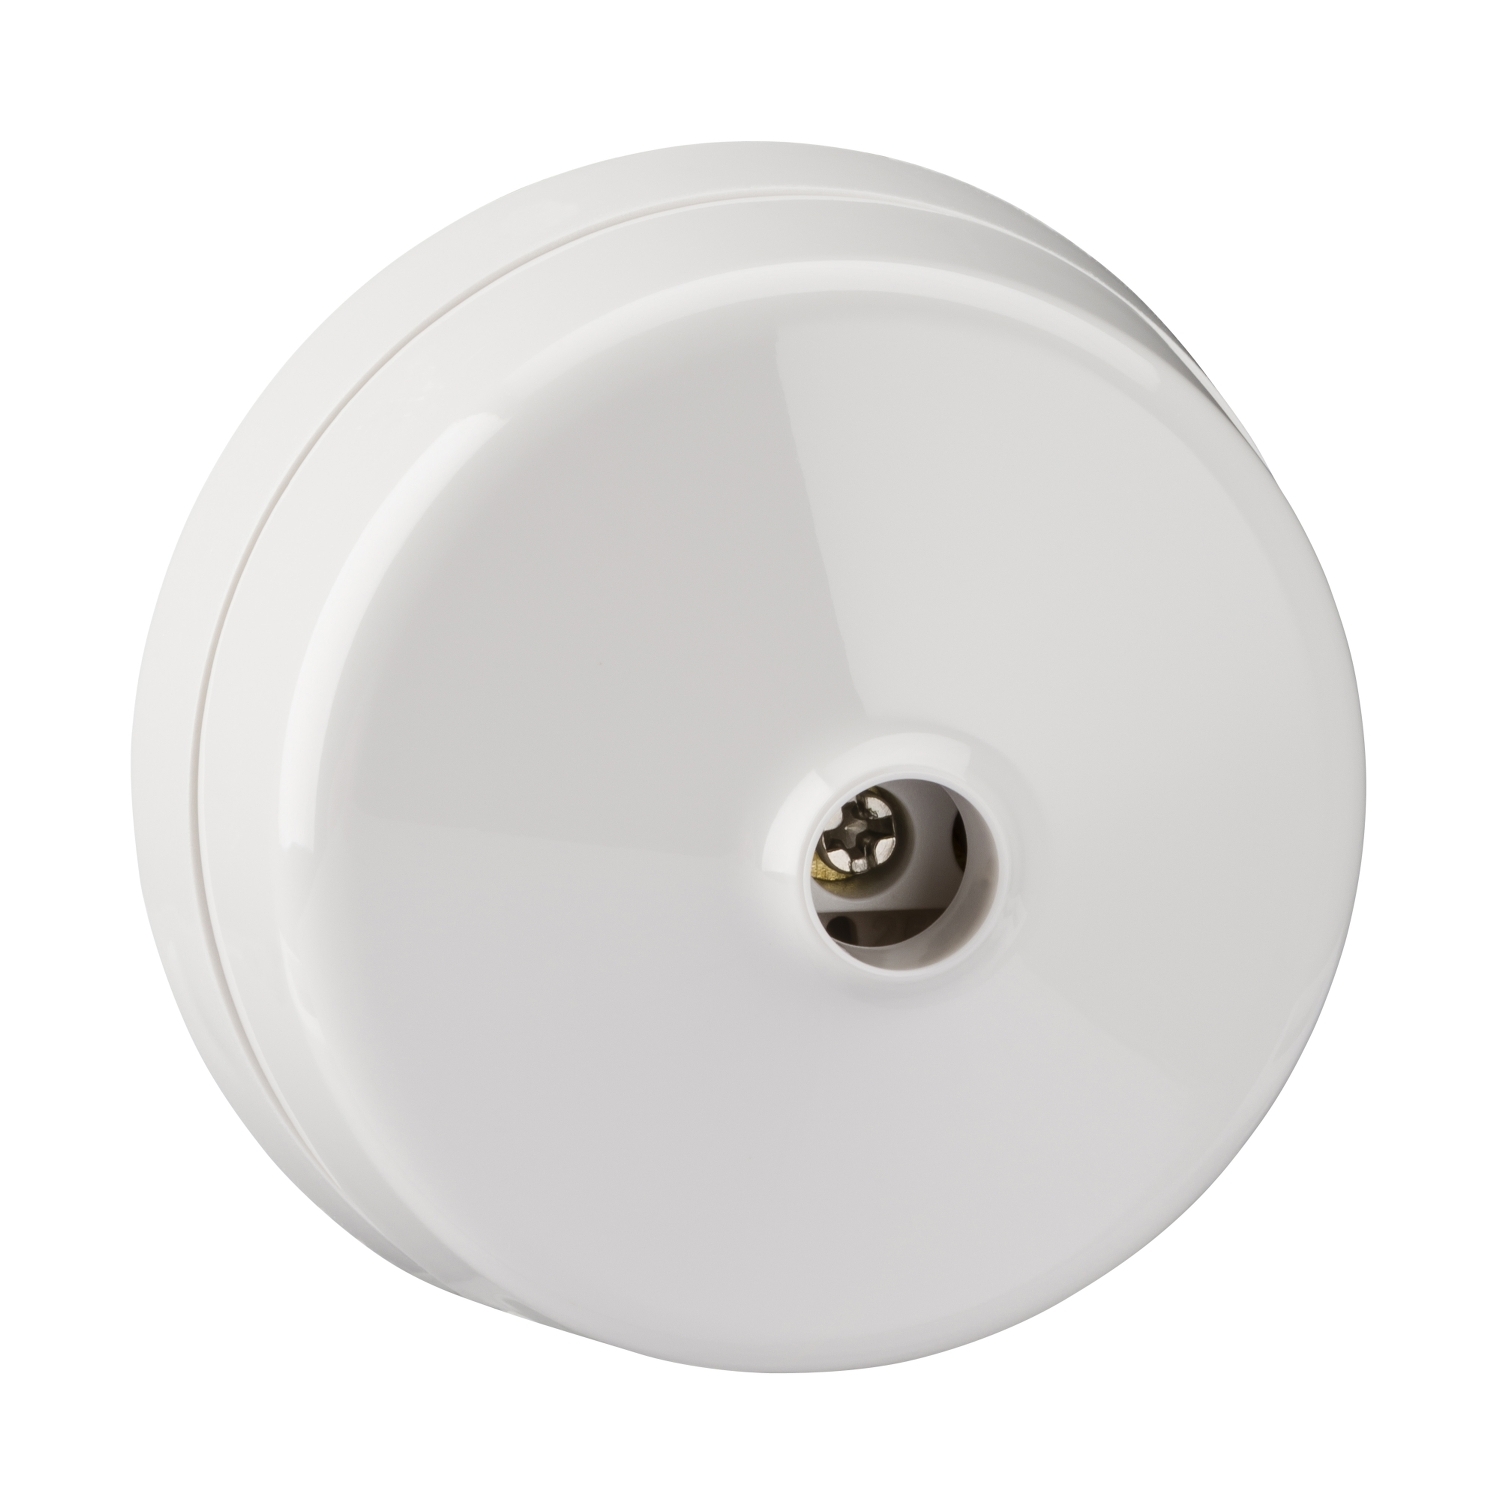 Ceiling Rose Lighting and Accessories, 5A, 250VAC, 4-Terminal